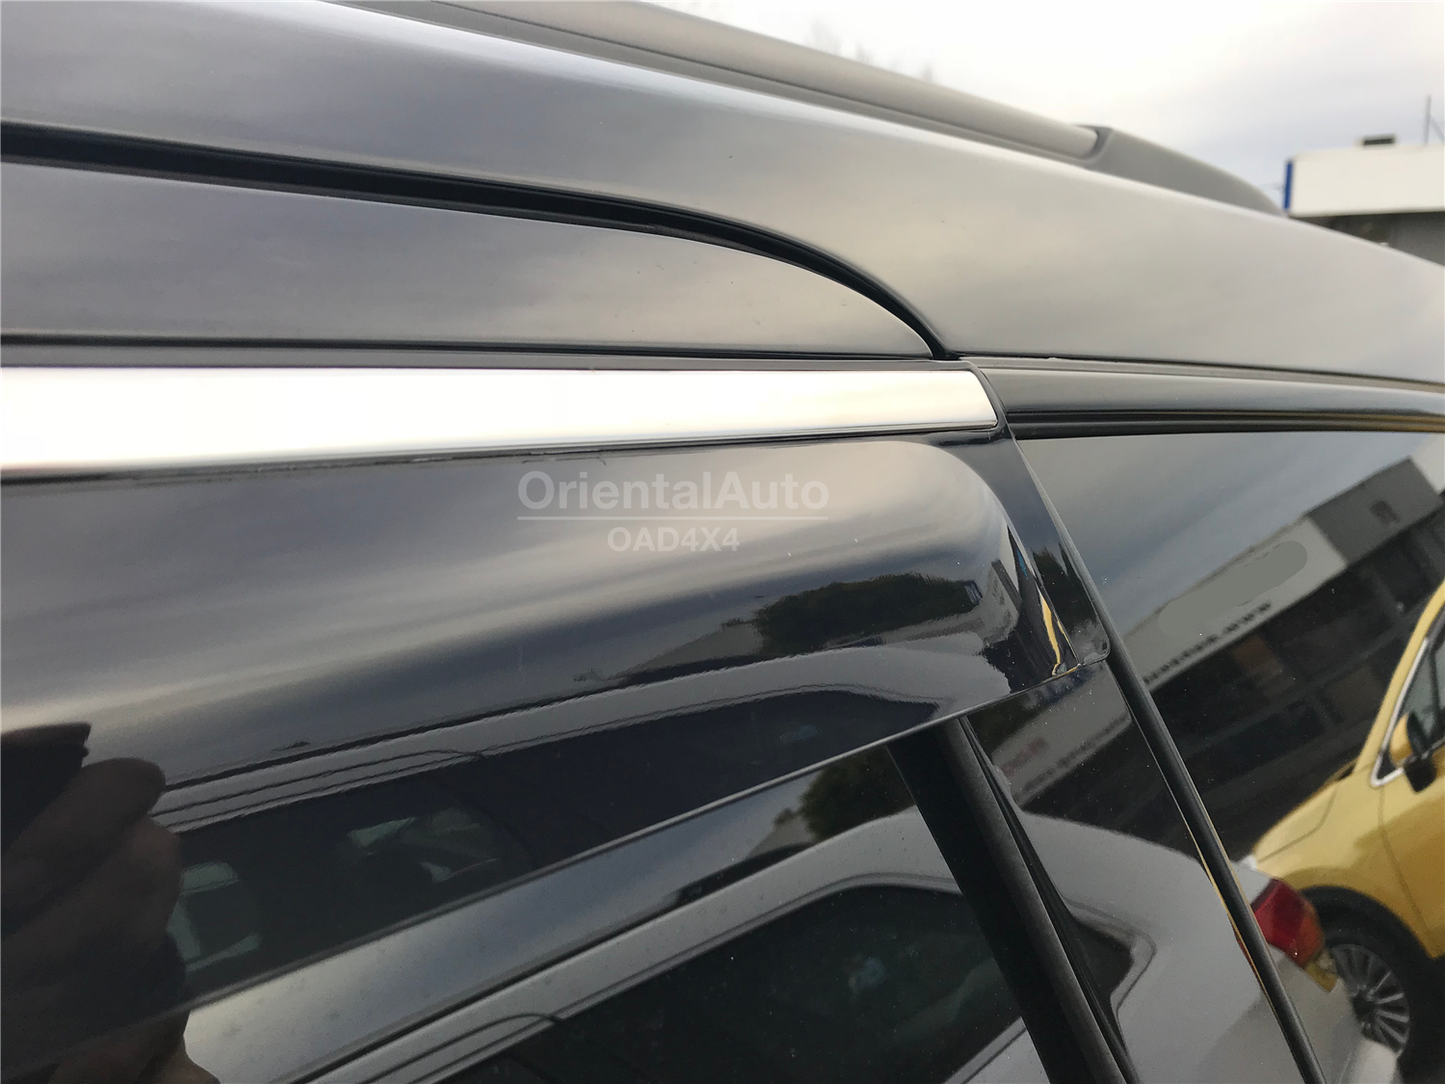 Injection Stainless Weathershields For Jeep Grand Cherokee WK 2010-2021 Weather Shields Window Visor